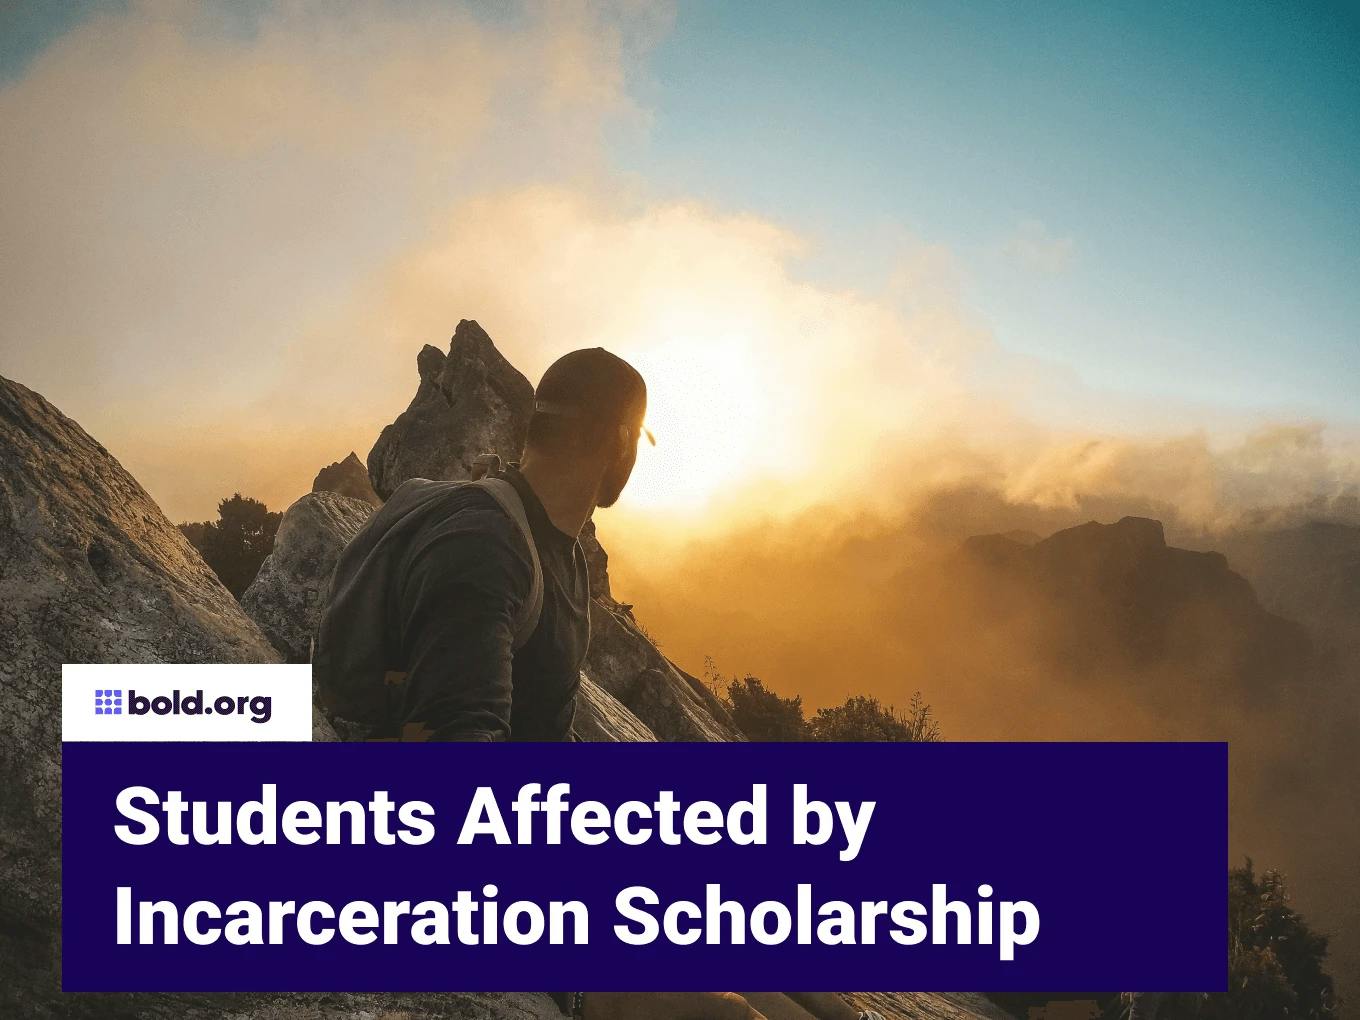 Students Impacted by Incarceration Scholarship